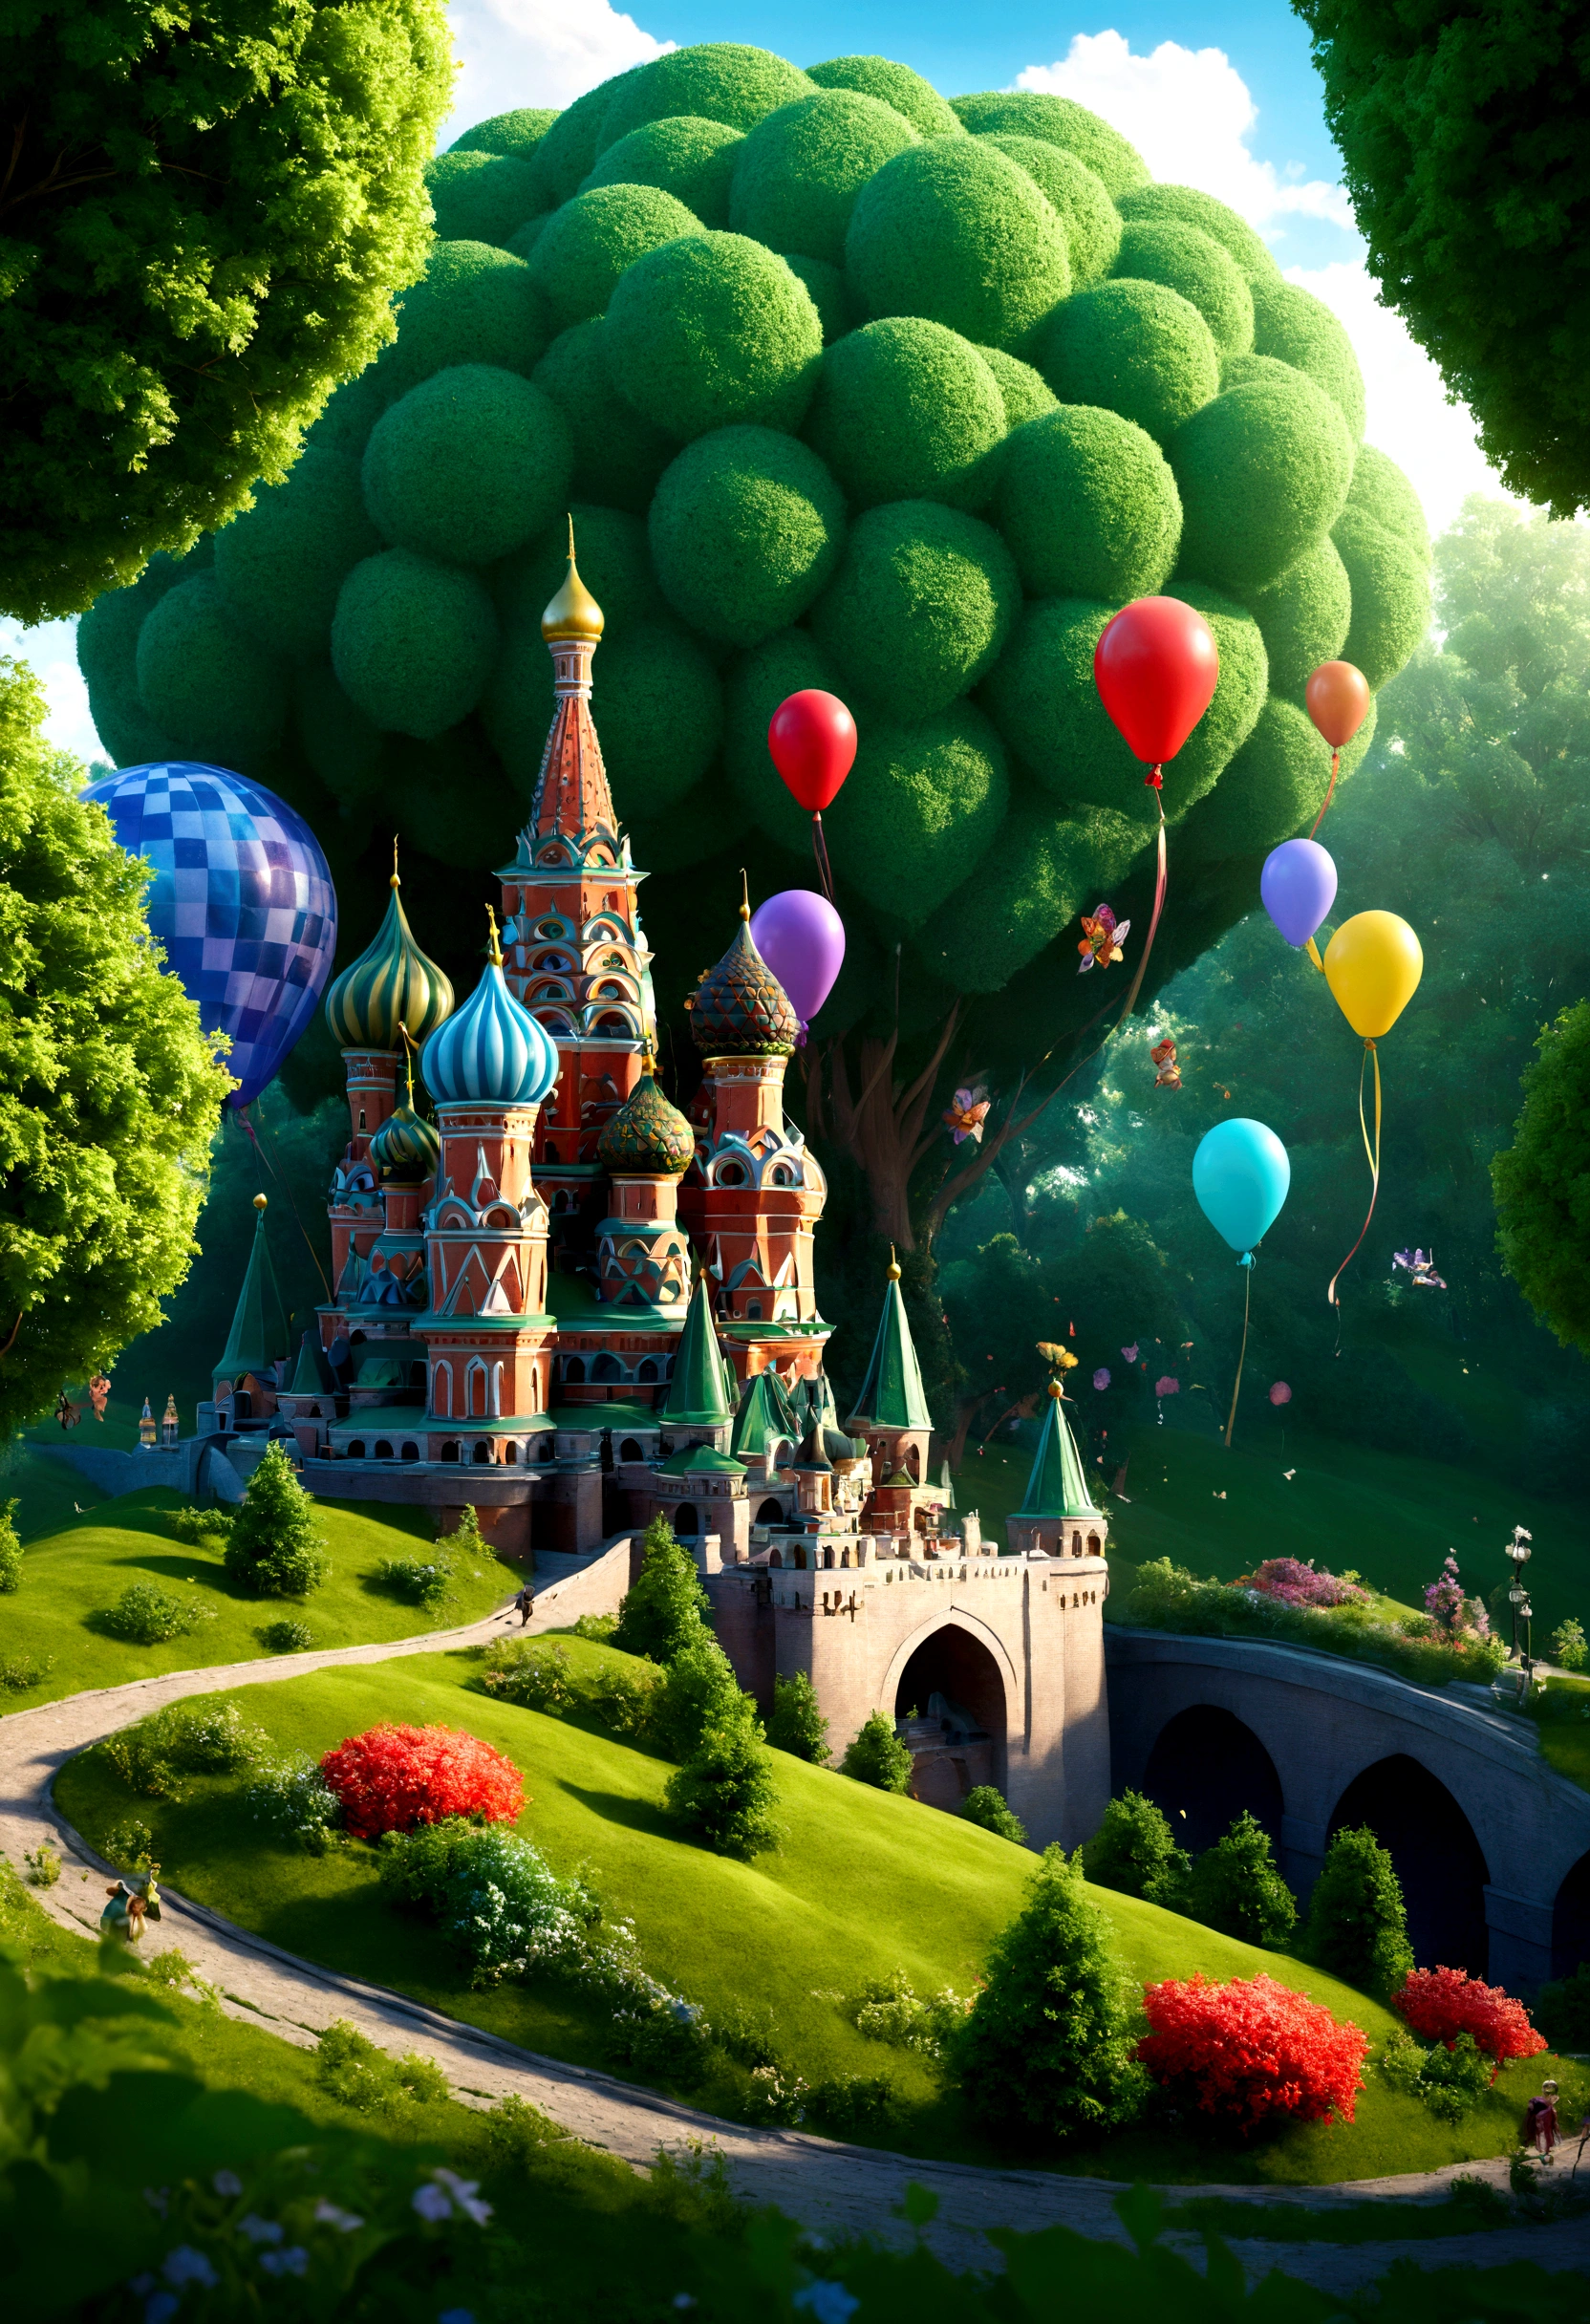 Stunning three-dimensional image, depth of field f0.95, a small fairy-tale world imitating fairy-tale Moscow among magical green fairy-tale trees and bright magical flowers, a fairy-tale world looks like little Moscow with its details and its fairy-tale world, colorful balloons fly up in this small fairy-tale Moscow and an atmosphere of celebration and magic reigns, realistic, magical, in detail